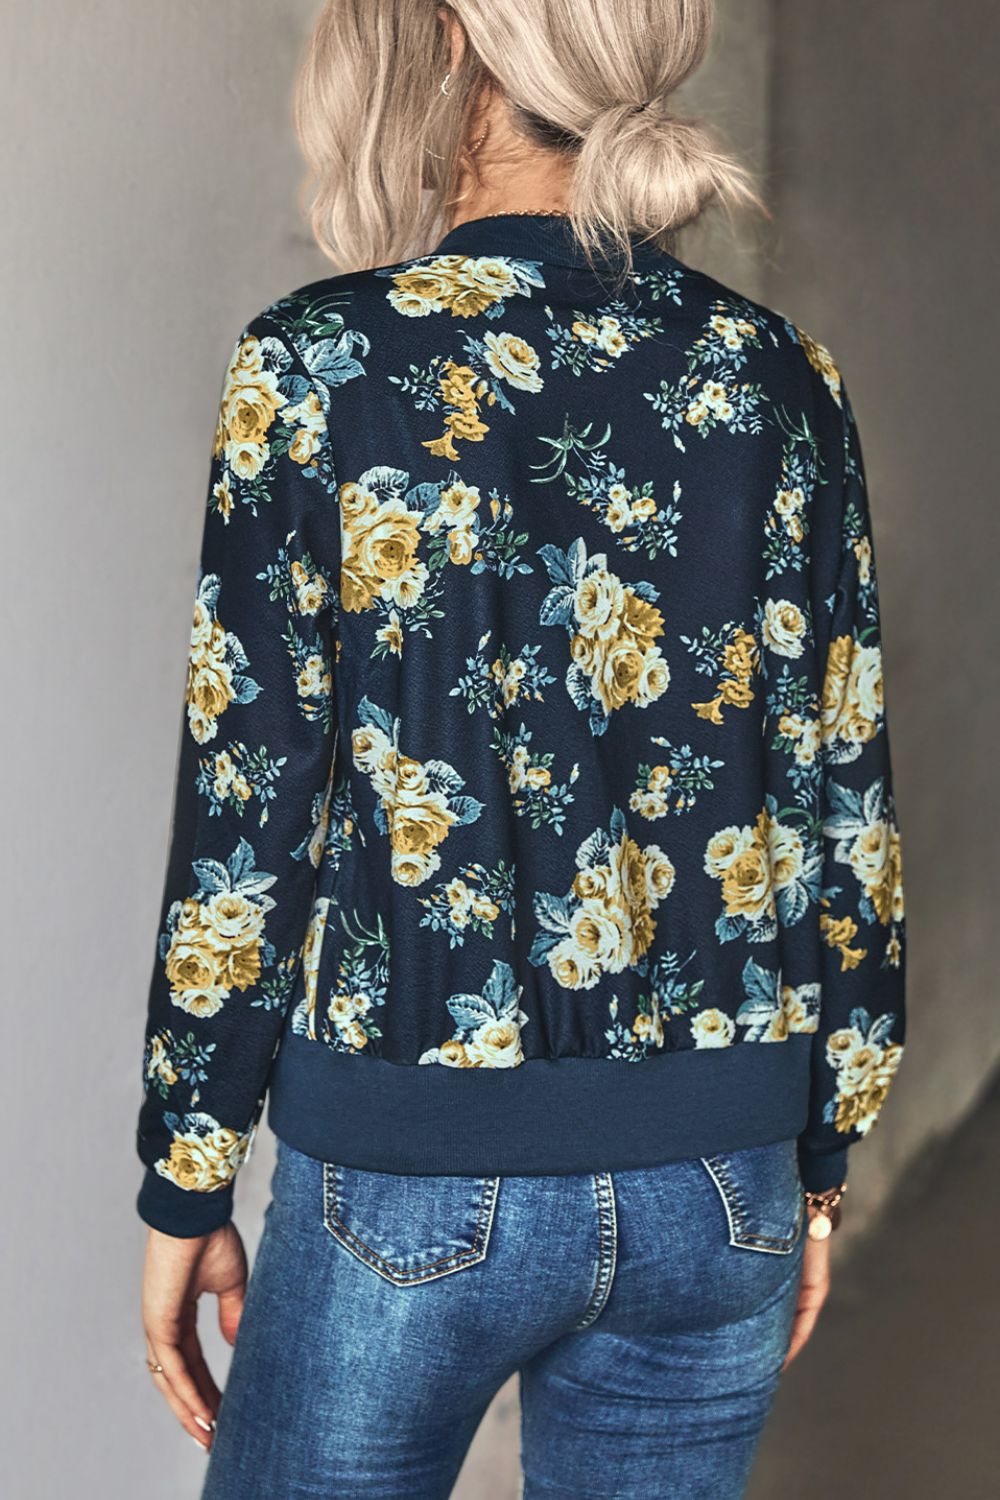 Back view of a Blonde Woman wearing a navy blue floral zip up lightweight floral bomber jacket unzipped over a white tube top paired with belted denim blue jeans